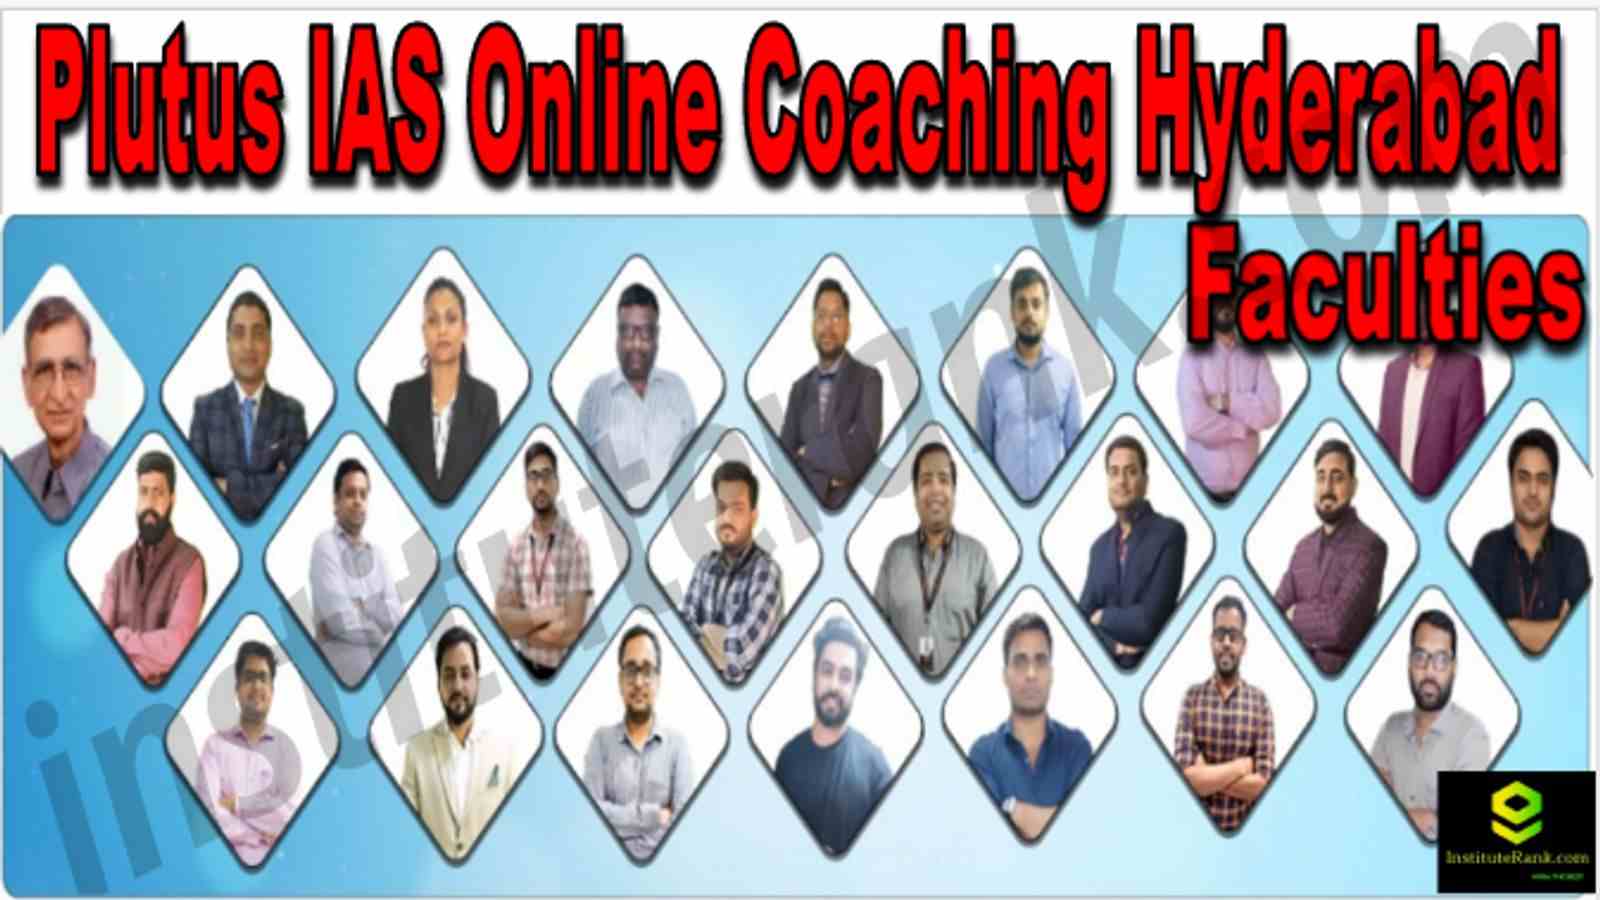 Plutus IAS Online Coaching Hyderabad Reviews Faculties